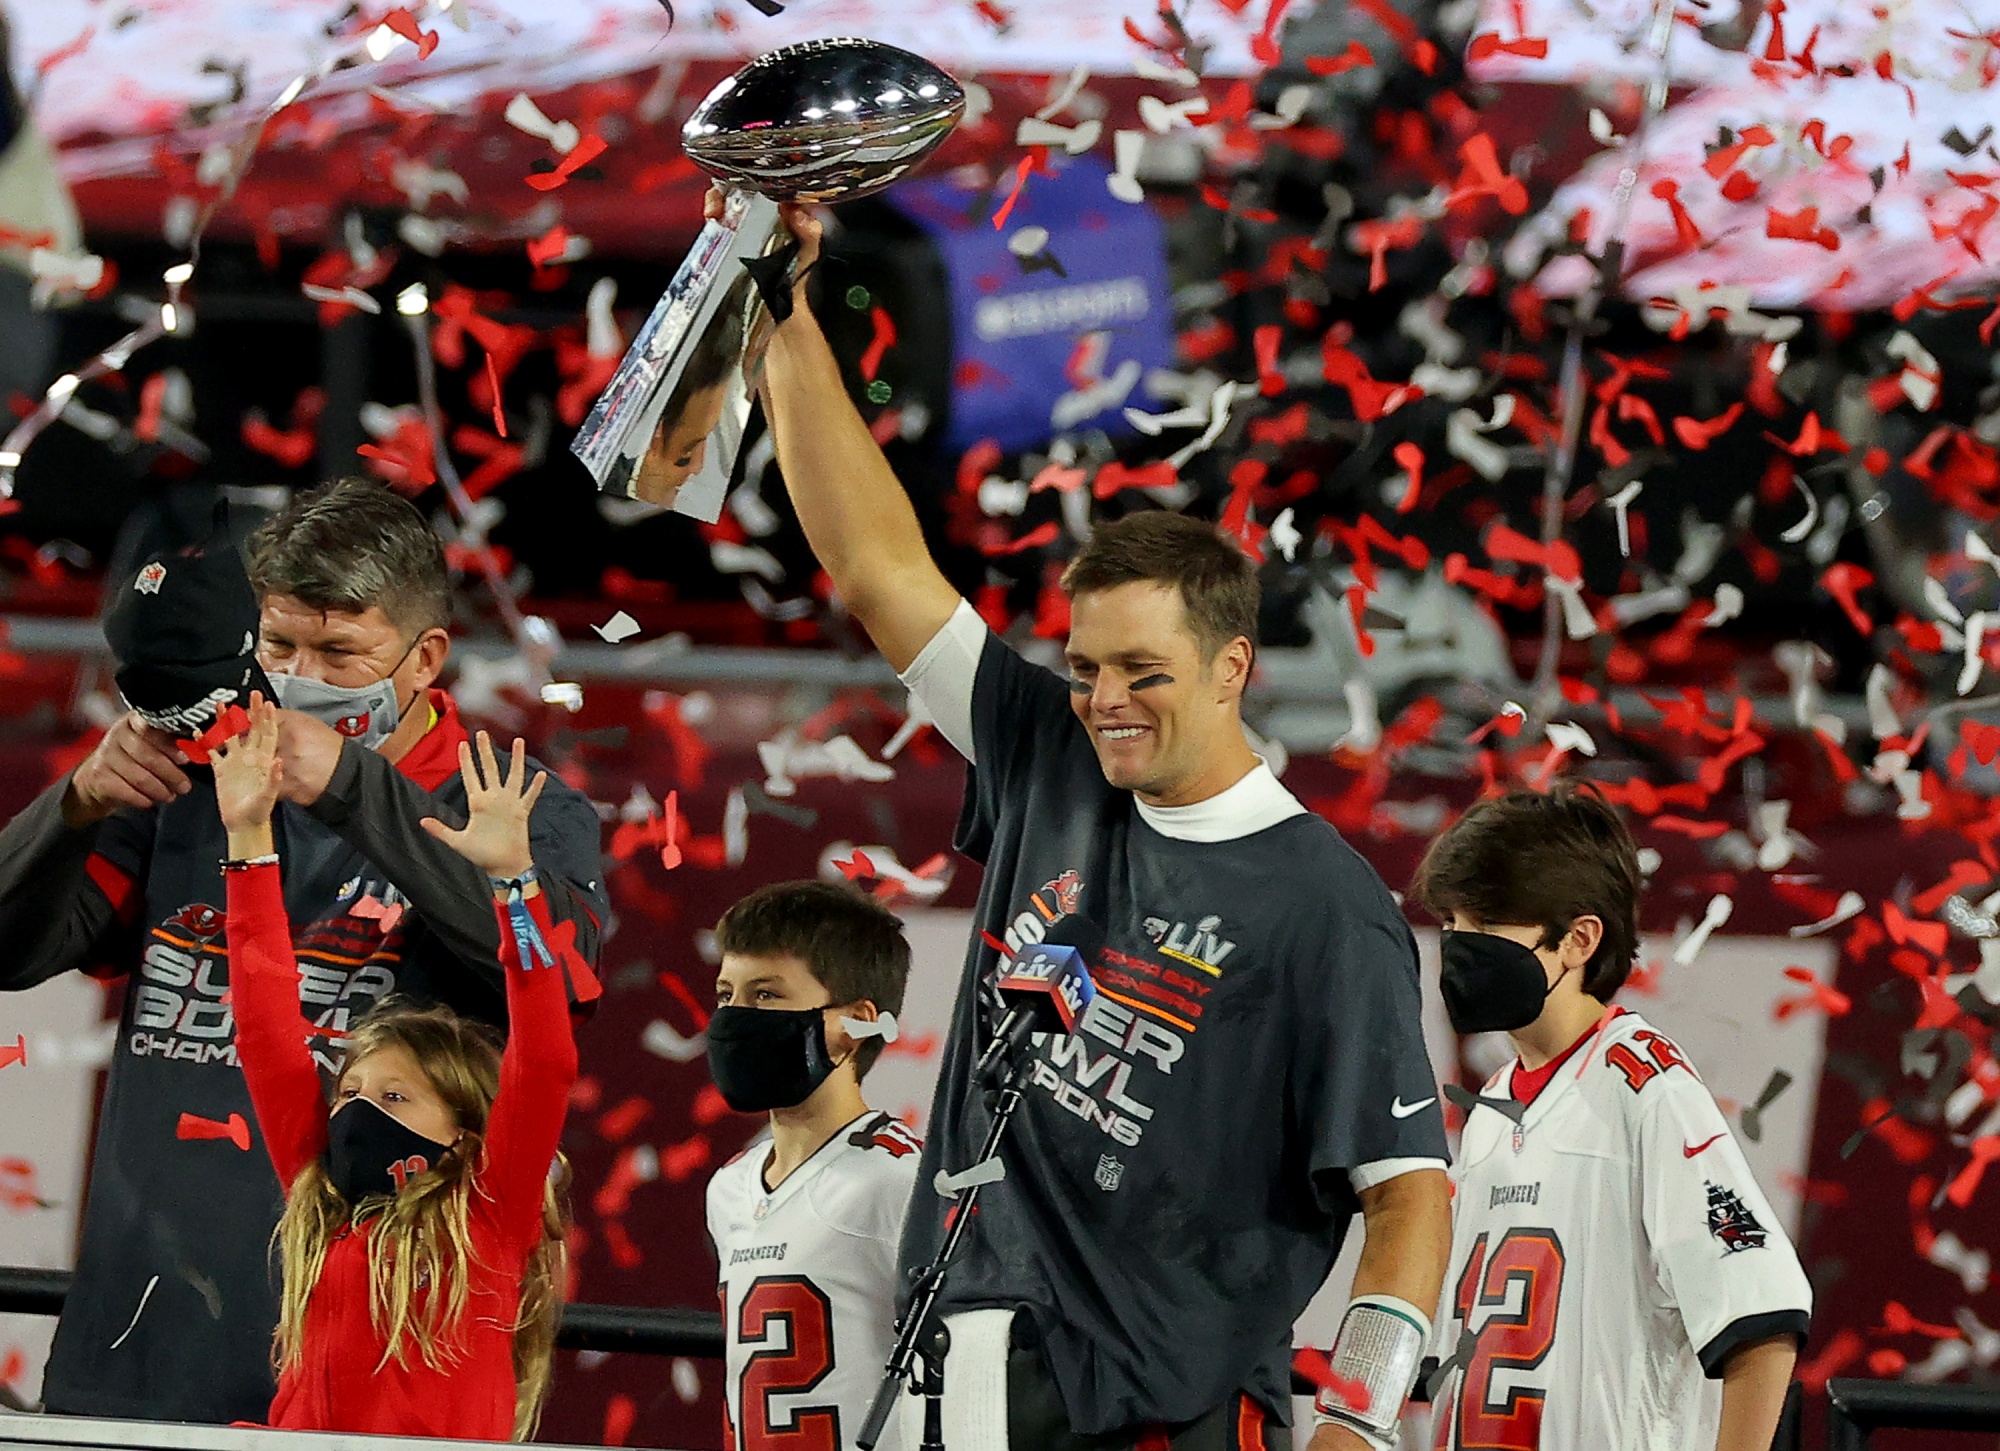 Tom Brady of the Tampa Bay Buccaneers celebrates with the Lombardi Trophy on Feb. 7.